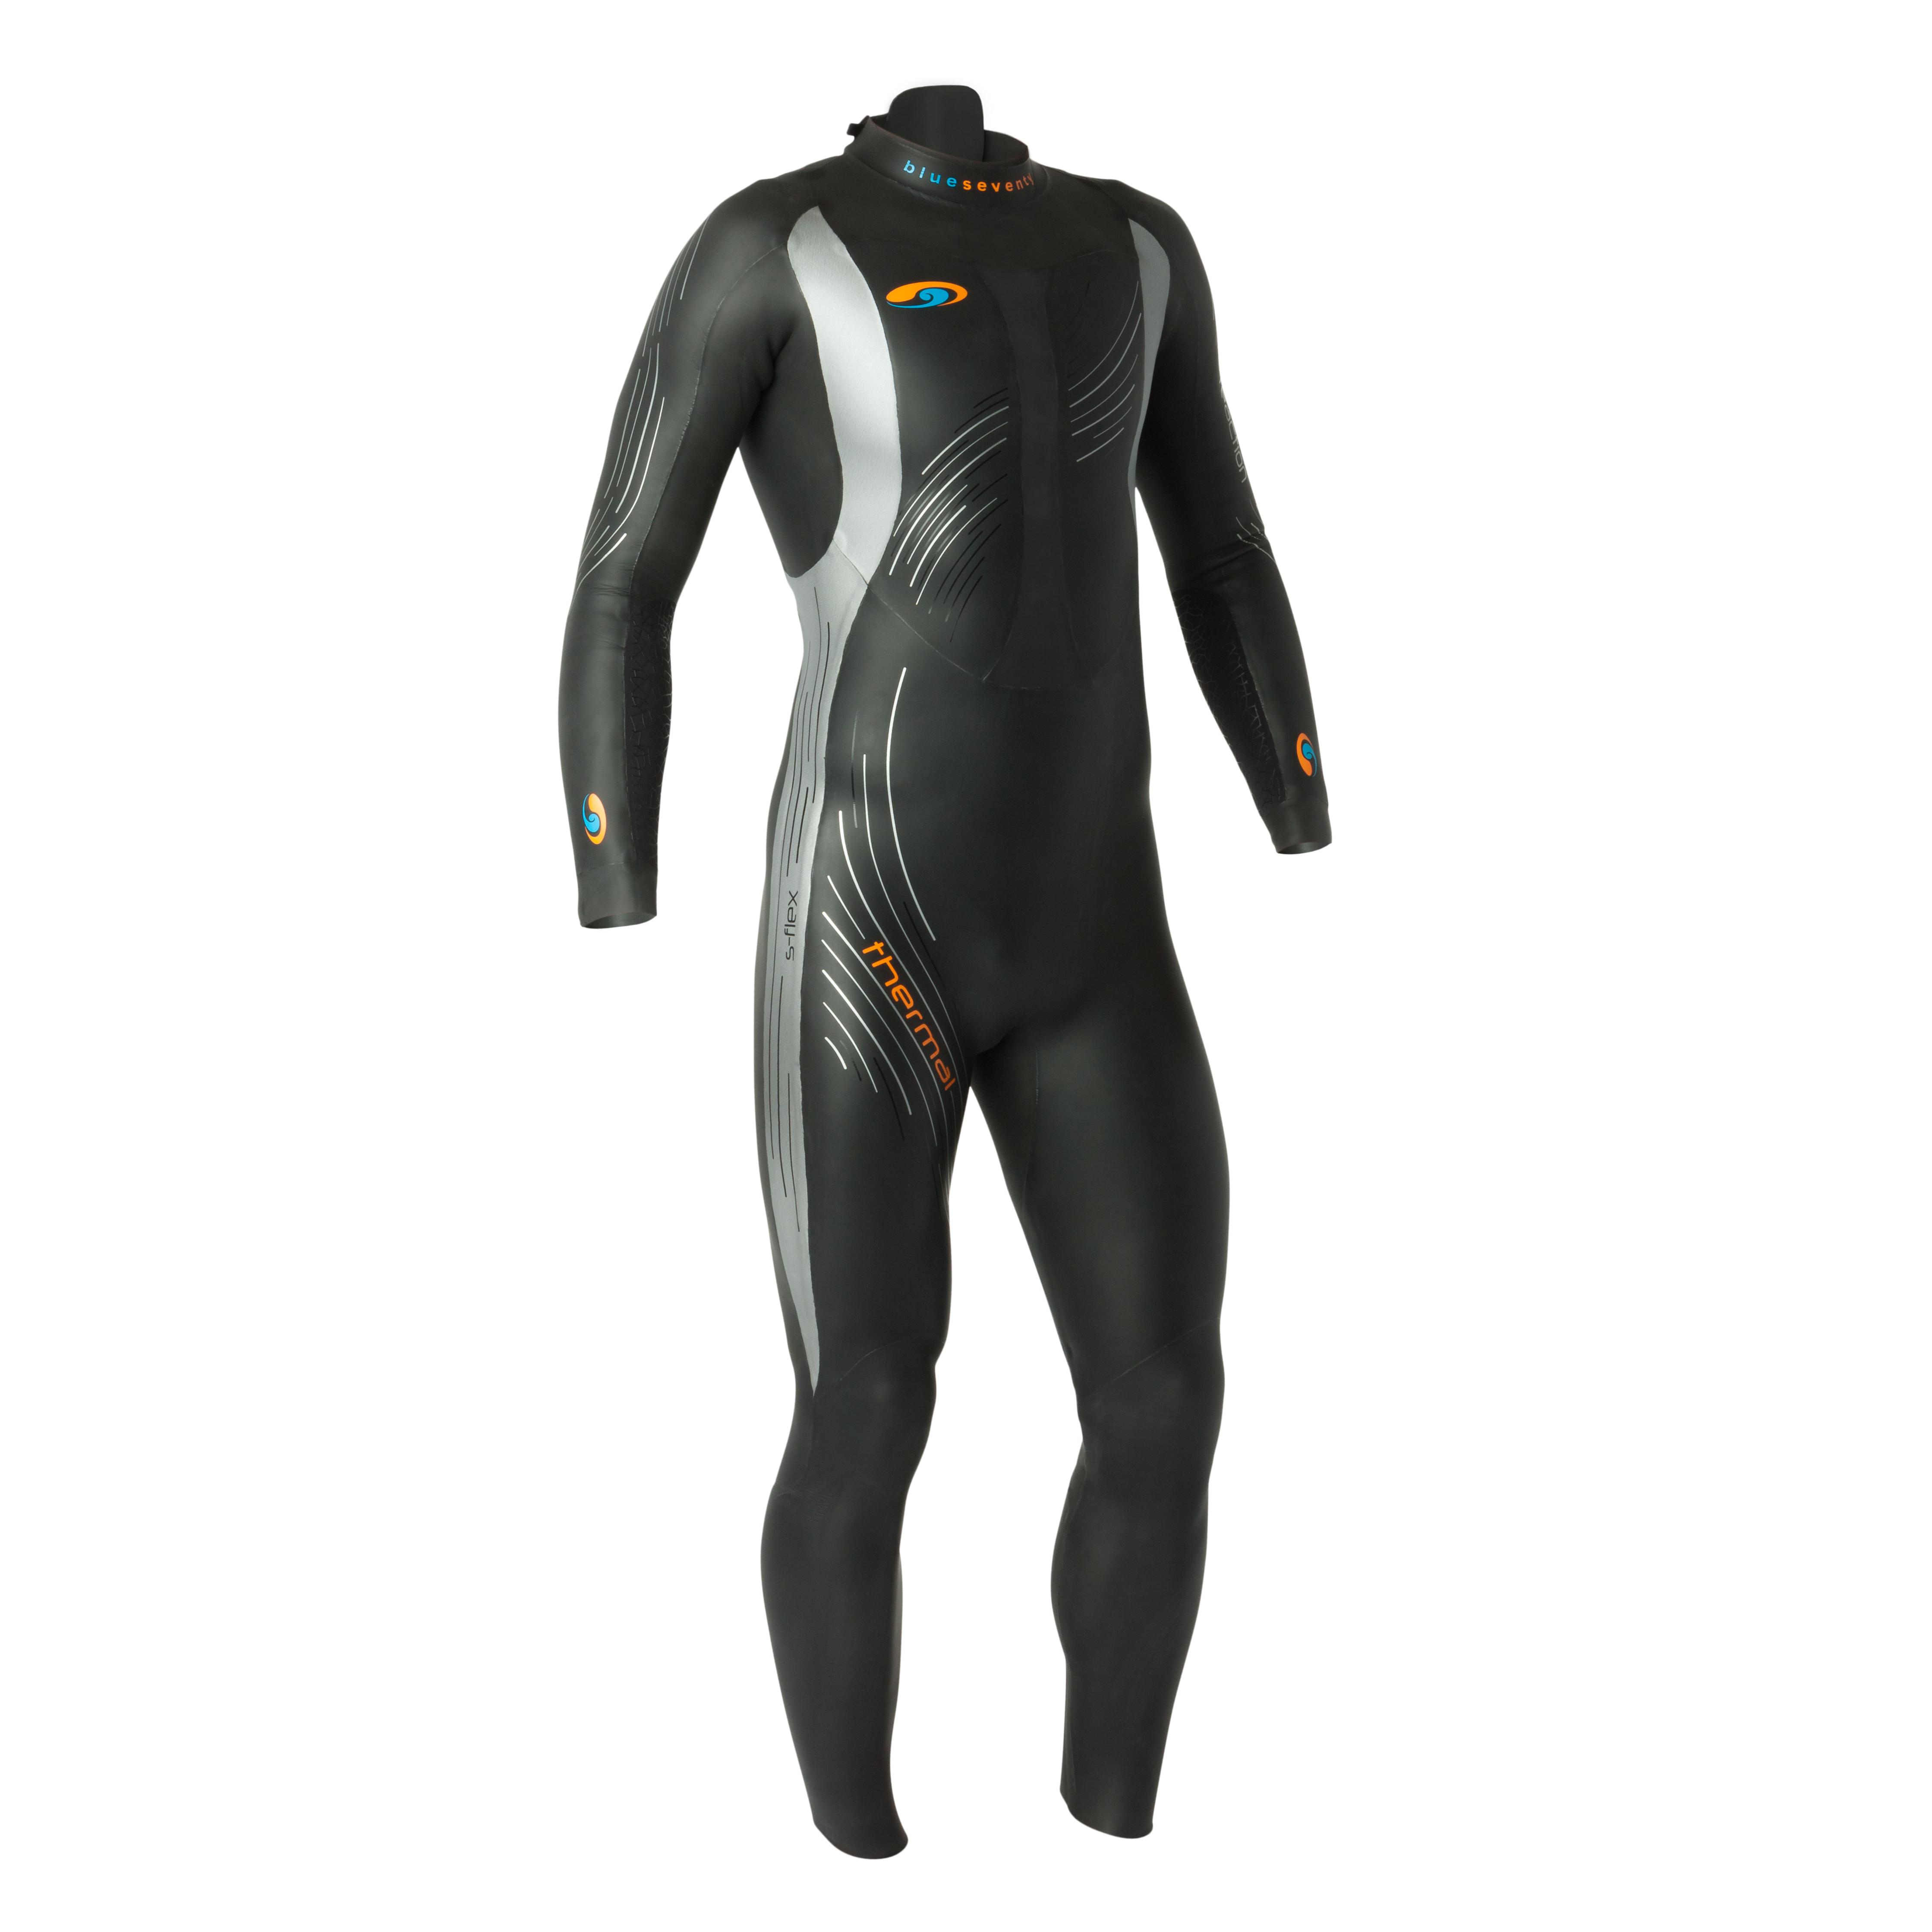 Blueseventy Thermal Reaction Wetsuit - Black/silver